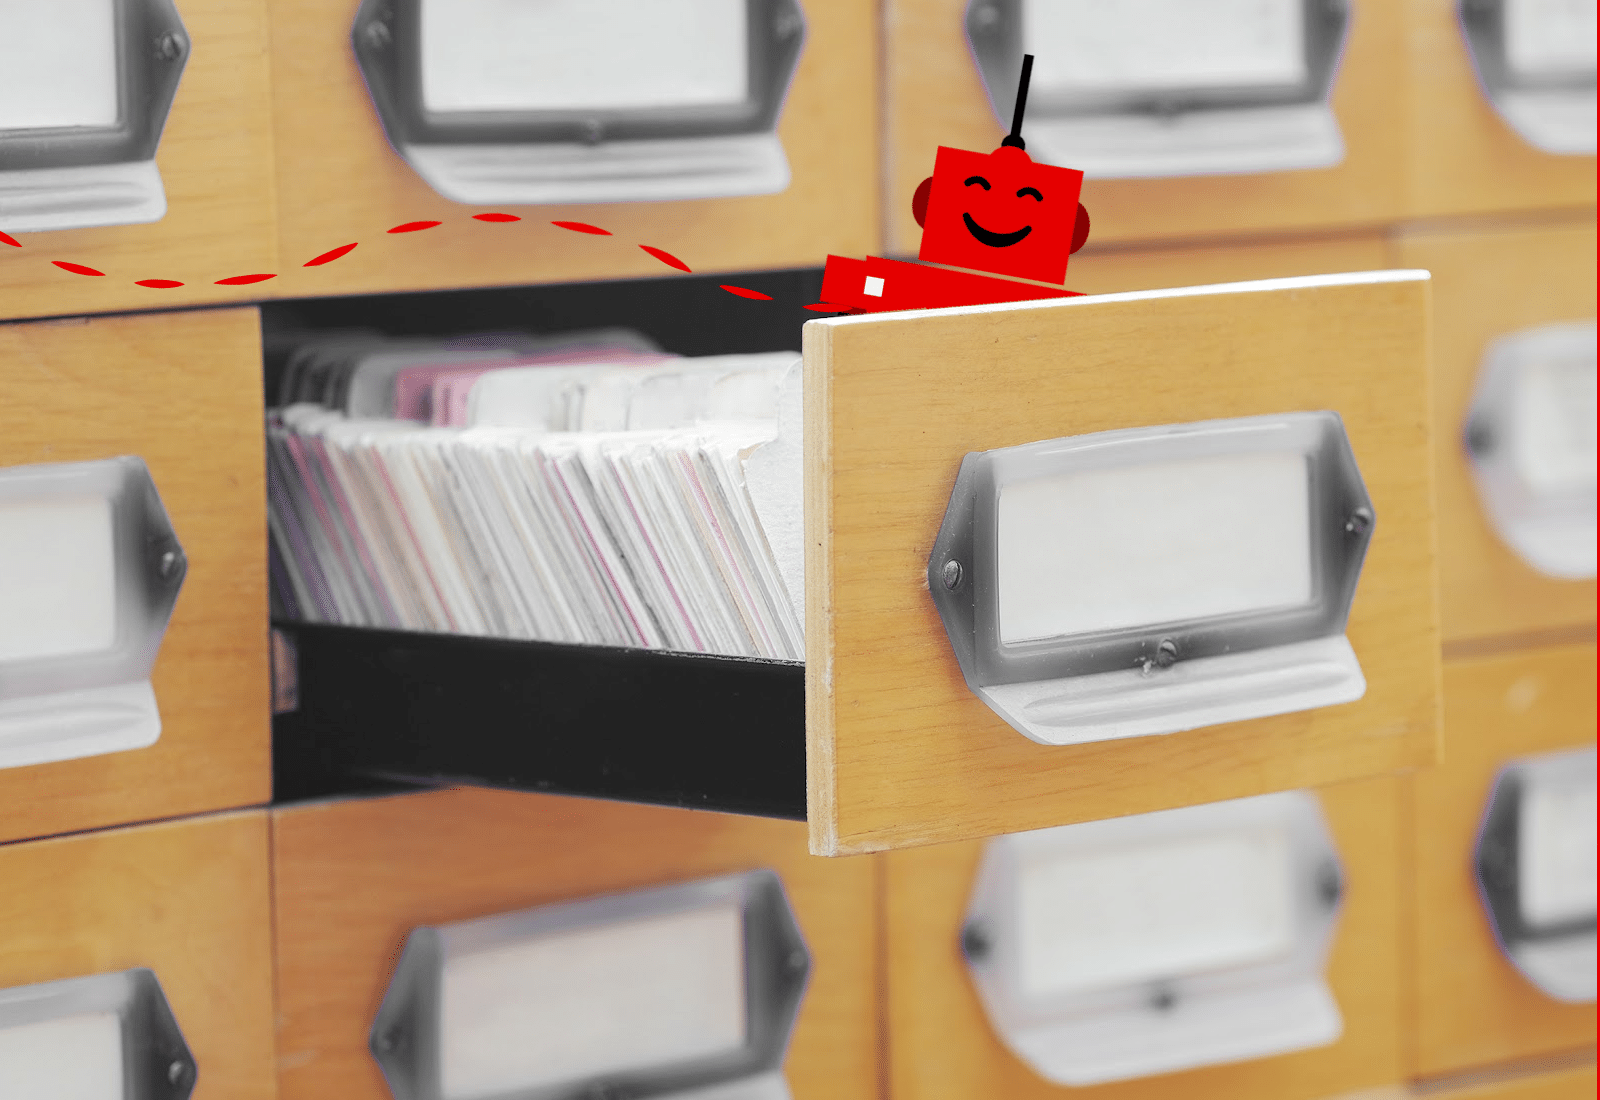 red robot peeking out of a card catalog drawer